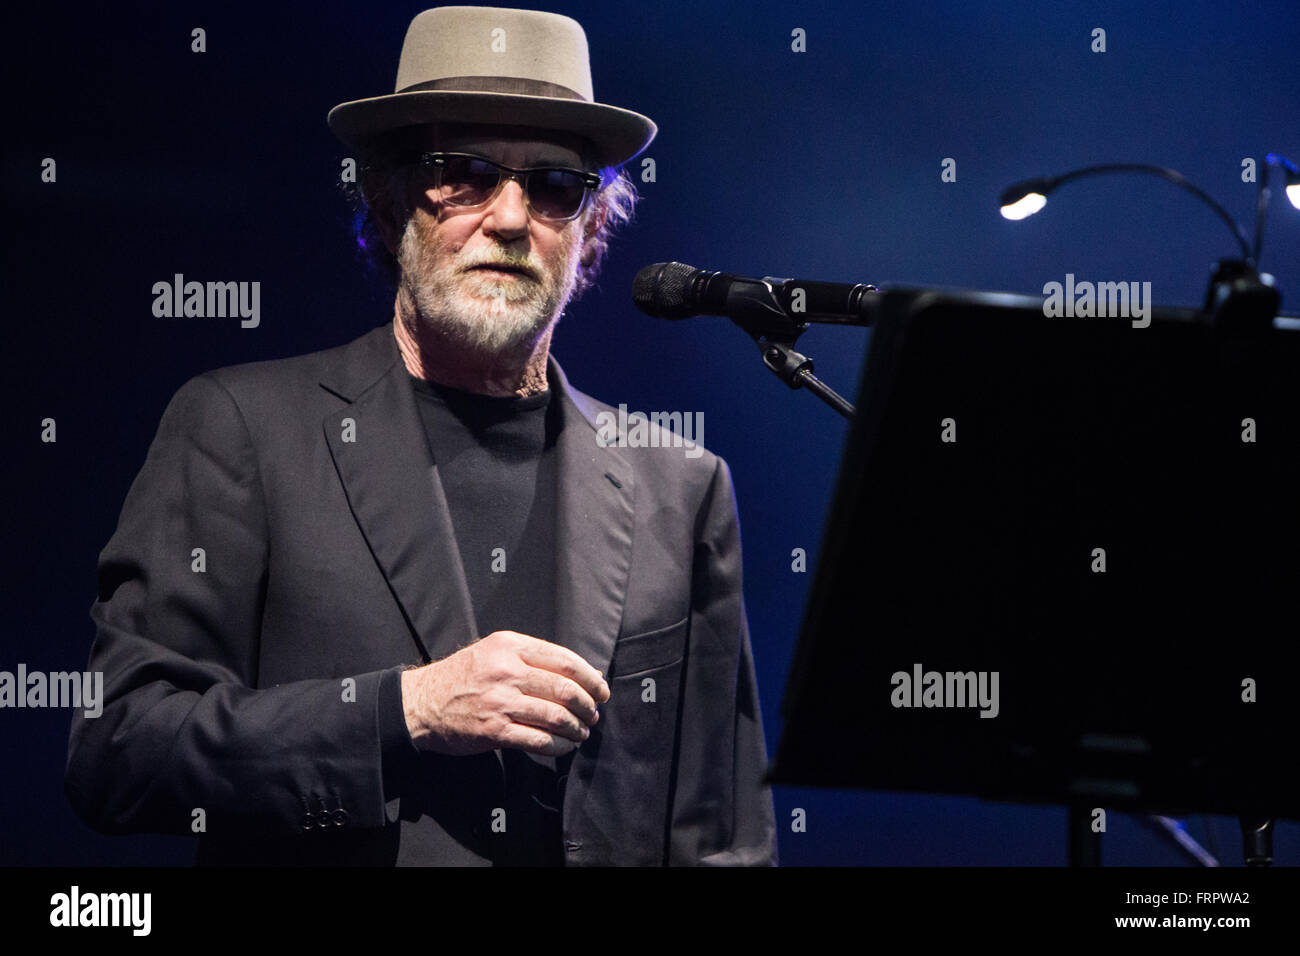 Milan Italy. 23th March 2016. The Italian pop/rock singer-songwriter FRANCESCO DE GREGORI performs live on stage at Alcatraz during the 'Amore e Furto Tour' Credit:  Rodolfo Sassano/Alamy Live News Stock Photo